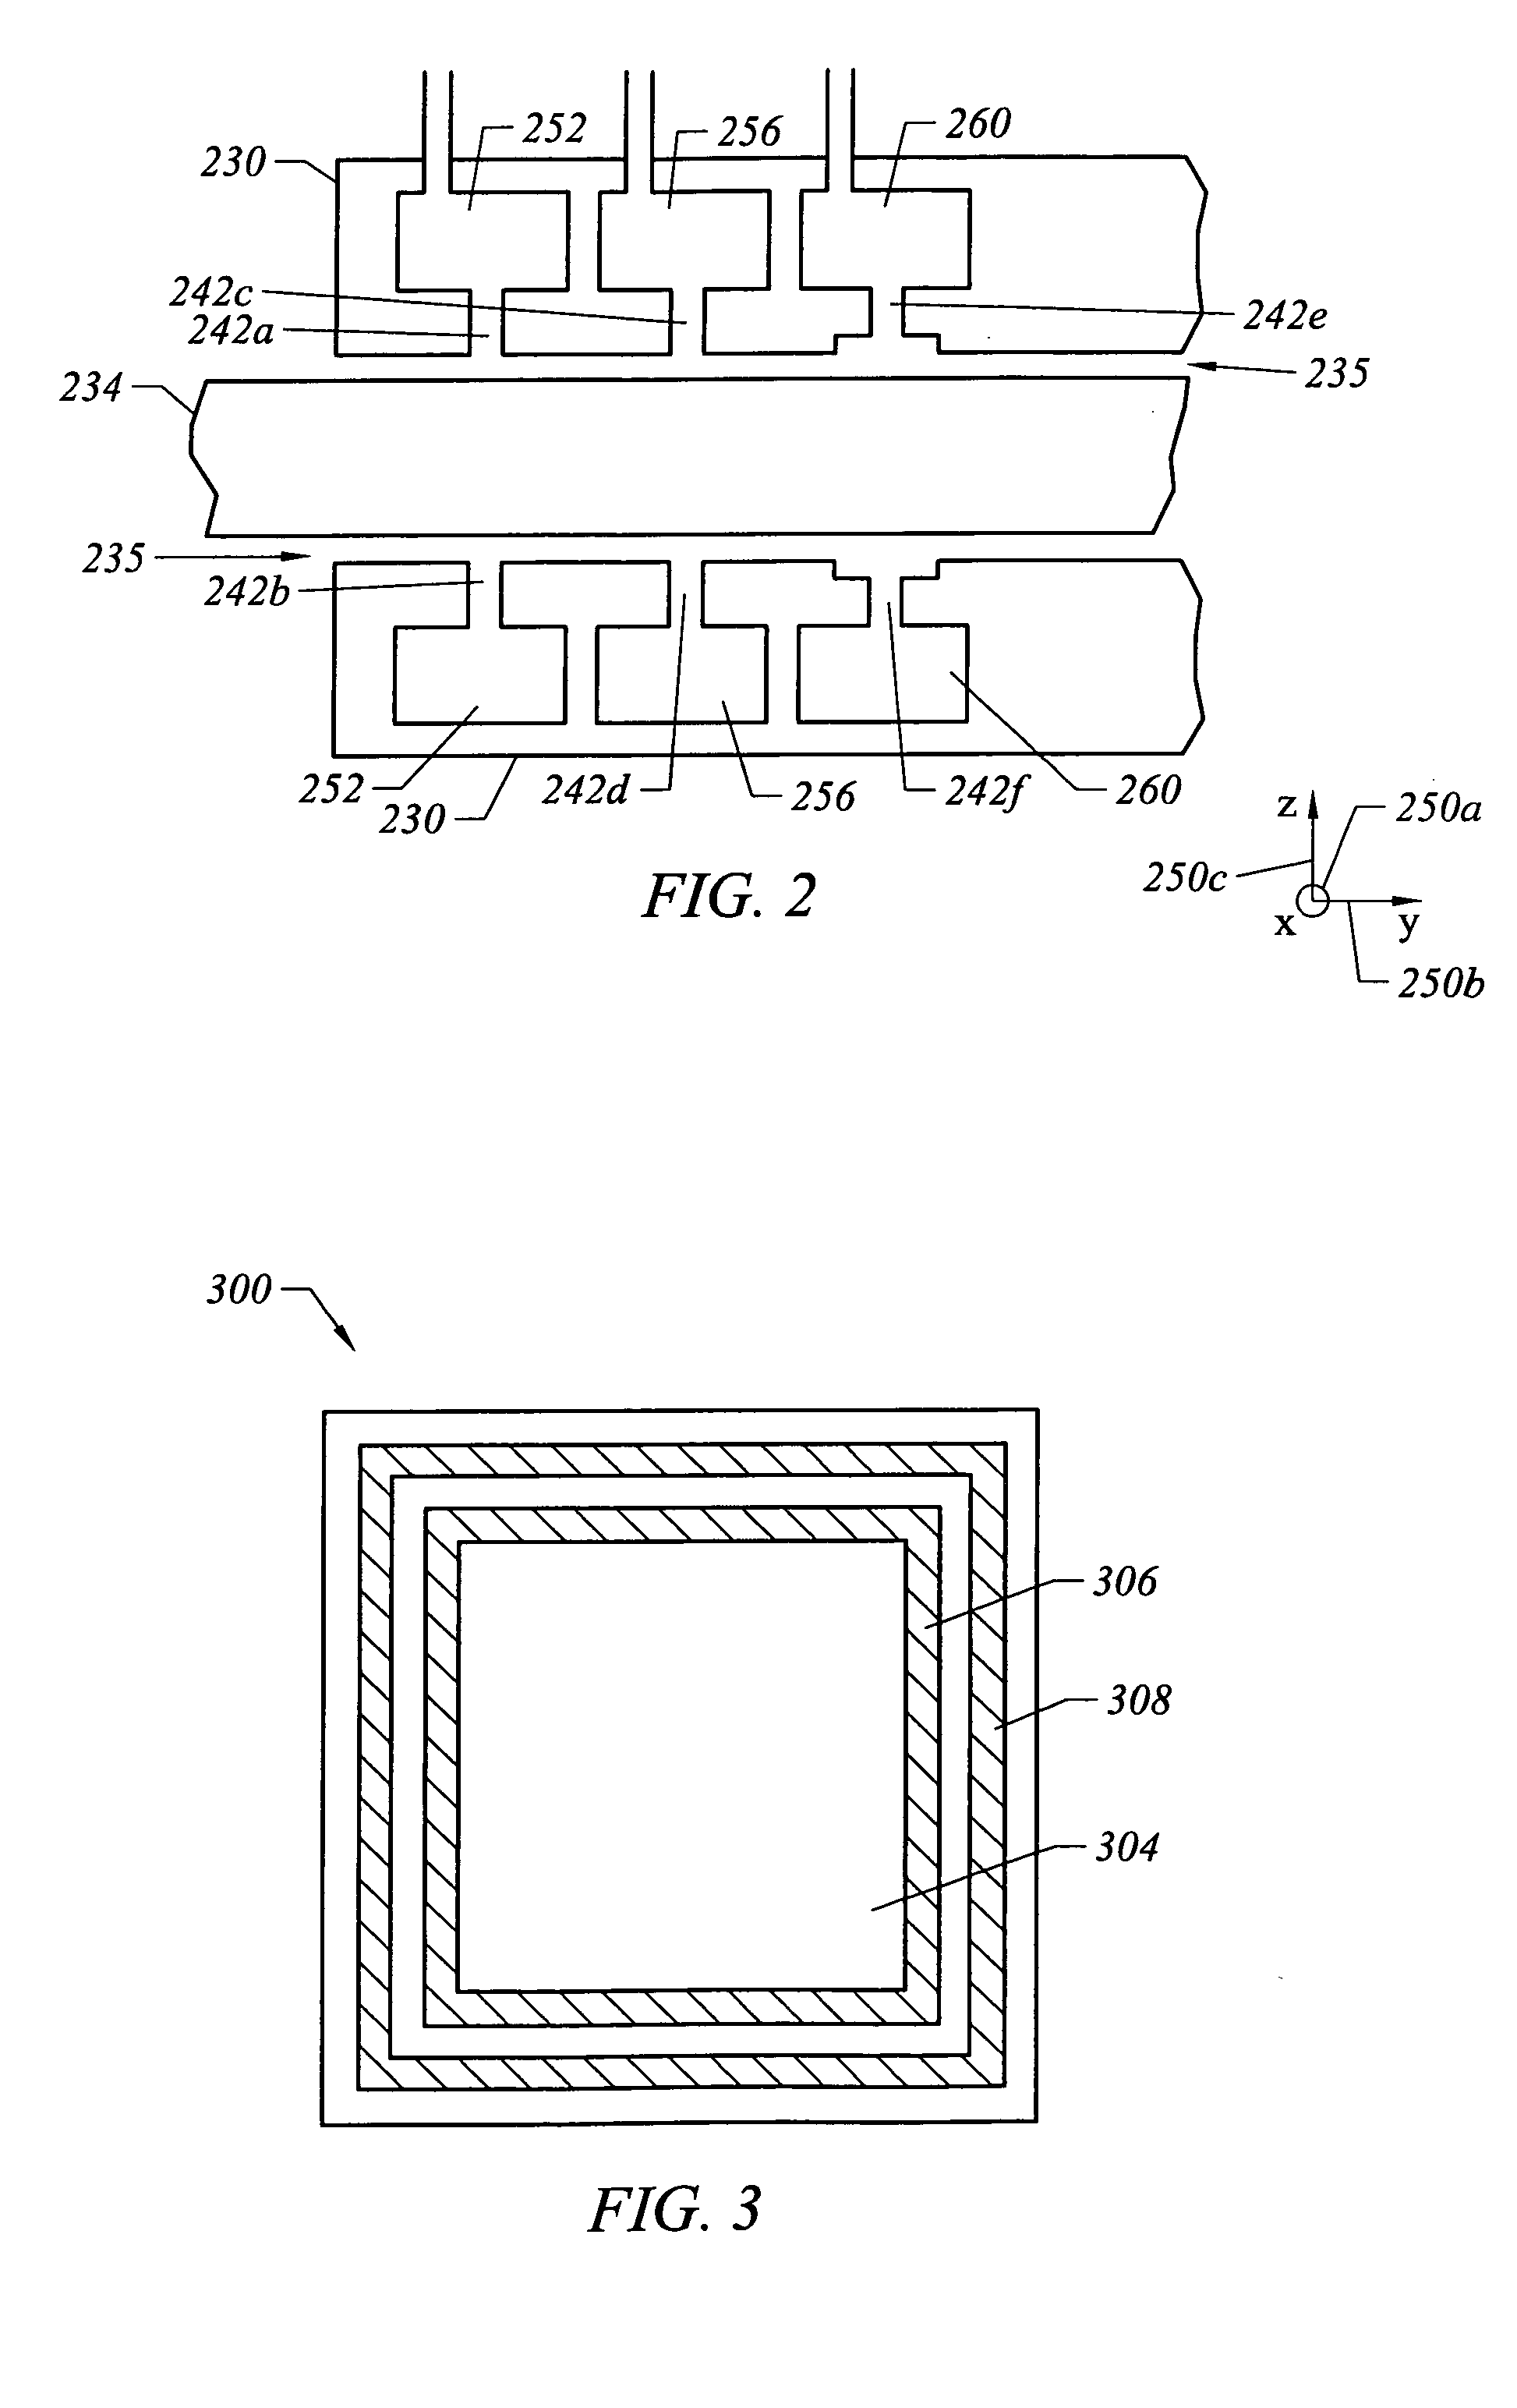 Wafer stage operable in a vacuum environment